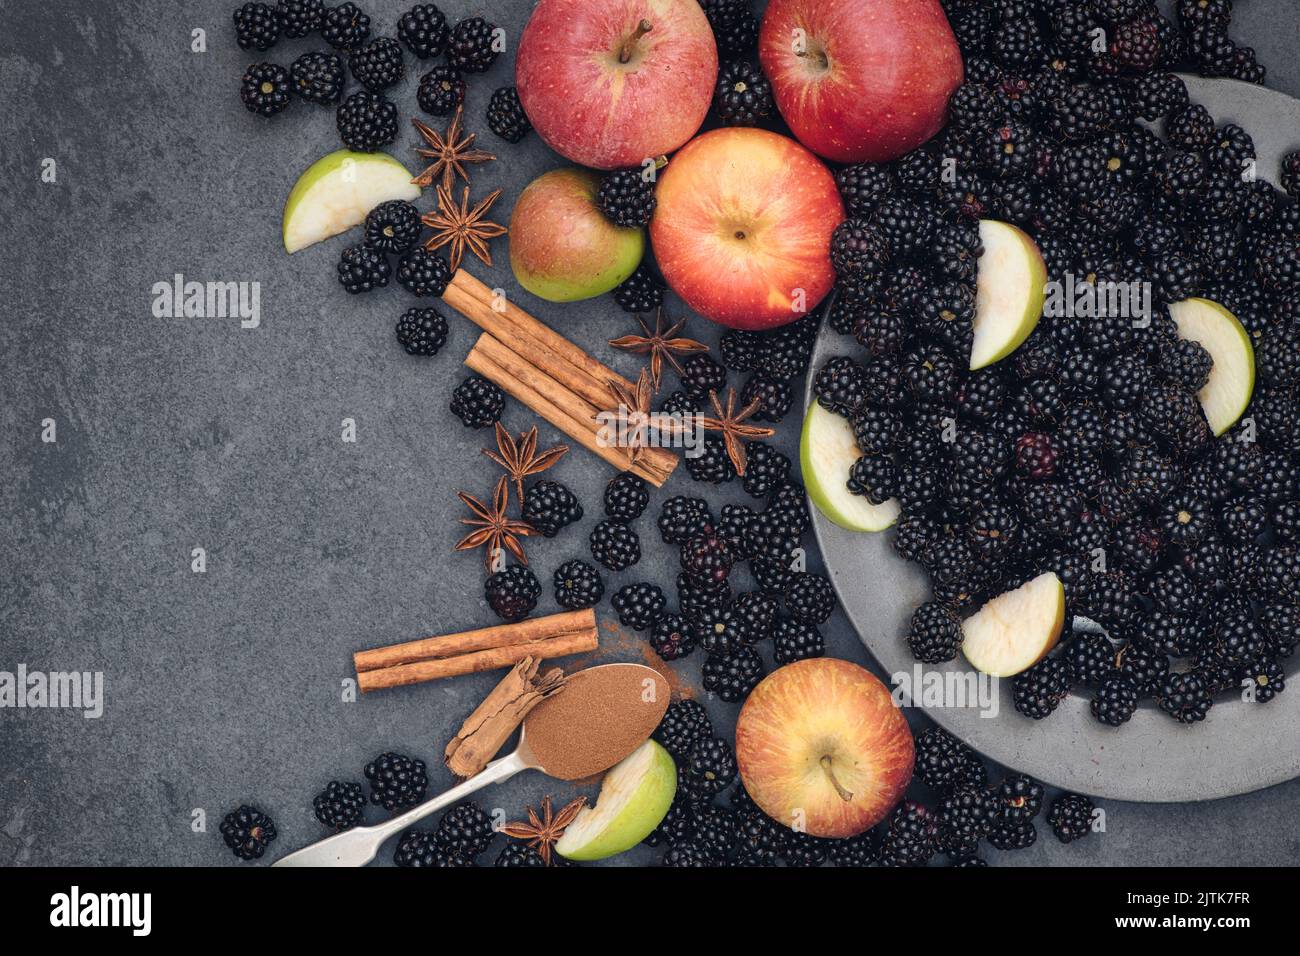 Foraged blackberries and apples with cinnamon and star anise on slate Stock Photo